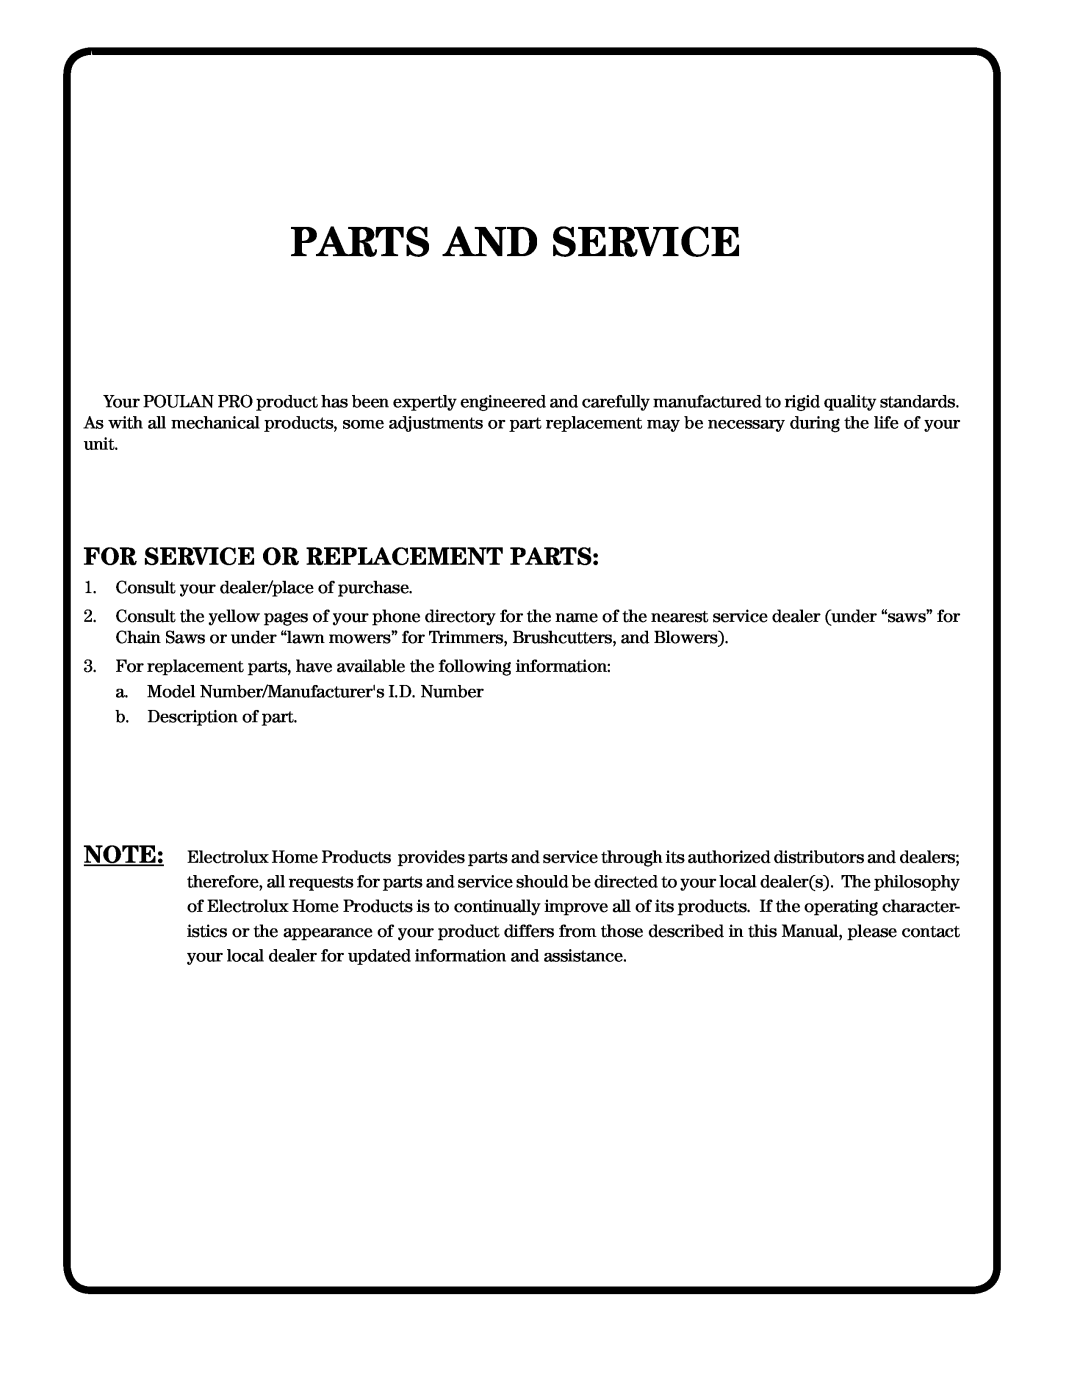 Poulan 184865 owner manual Parts And Service, For Service Or Replacement Parts 